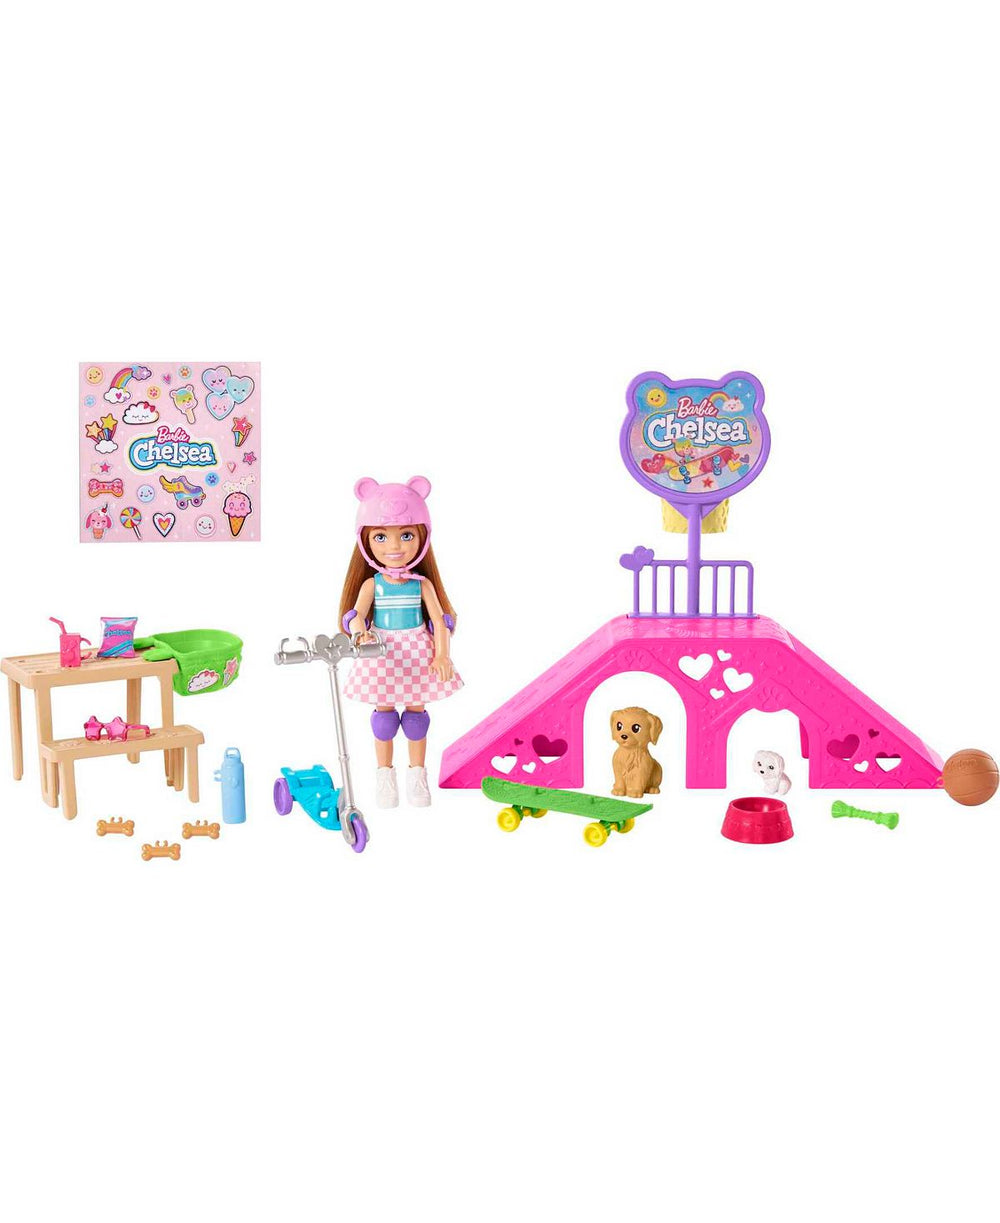 Barbie Chelsea Skatepark Playset with Doll, Scooter, and Pet Skateboard